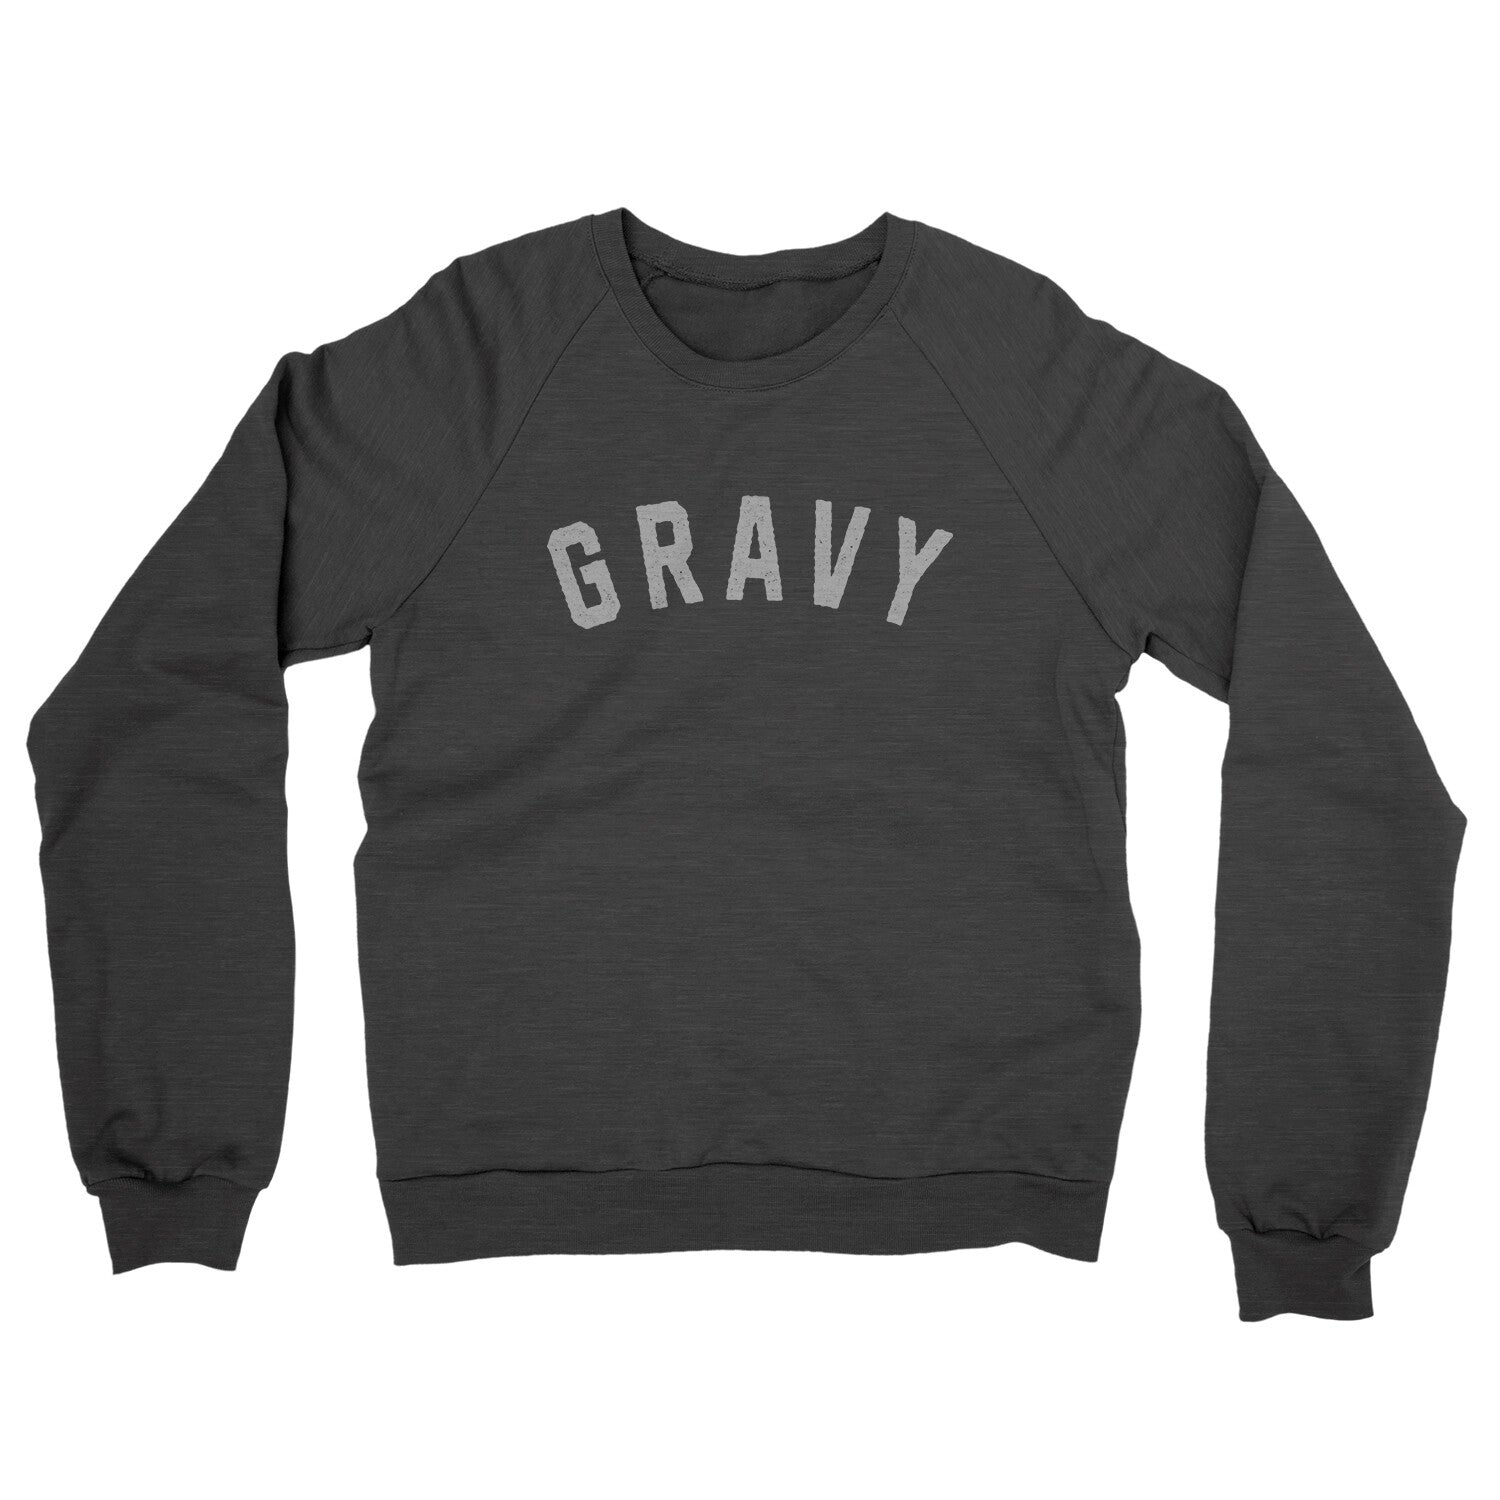 Gravy in Charcoal Heather Color